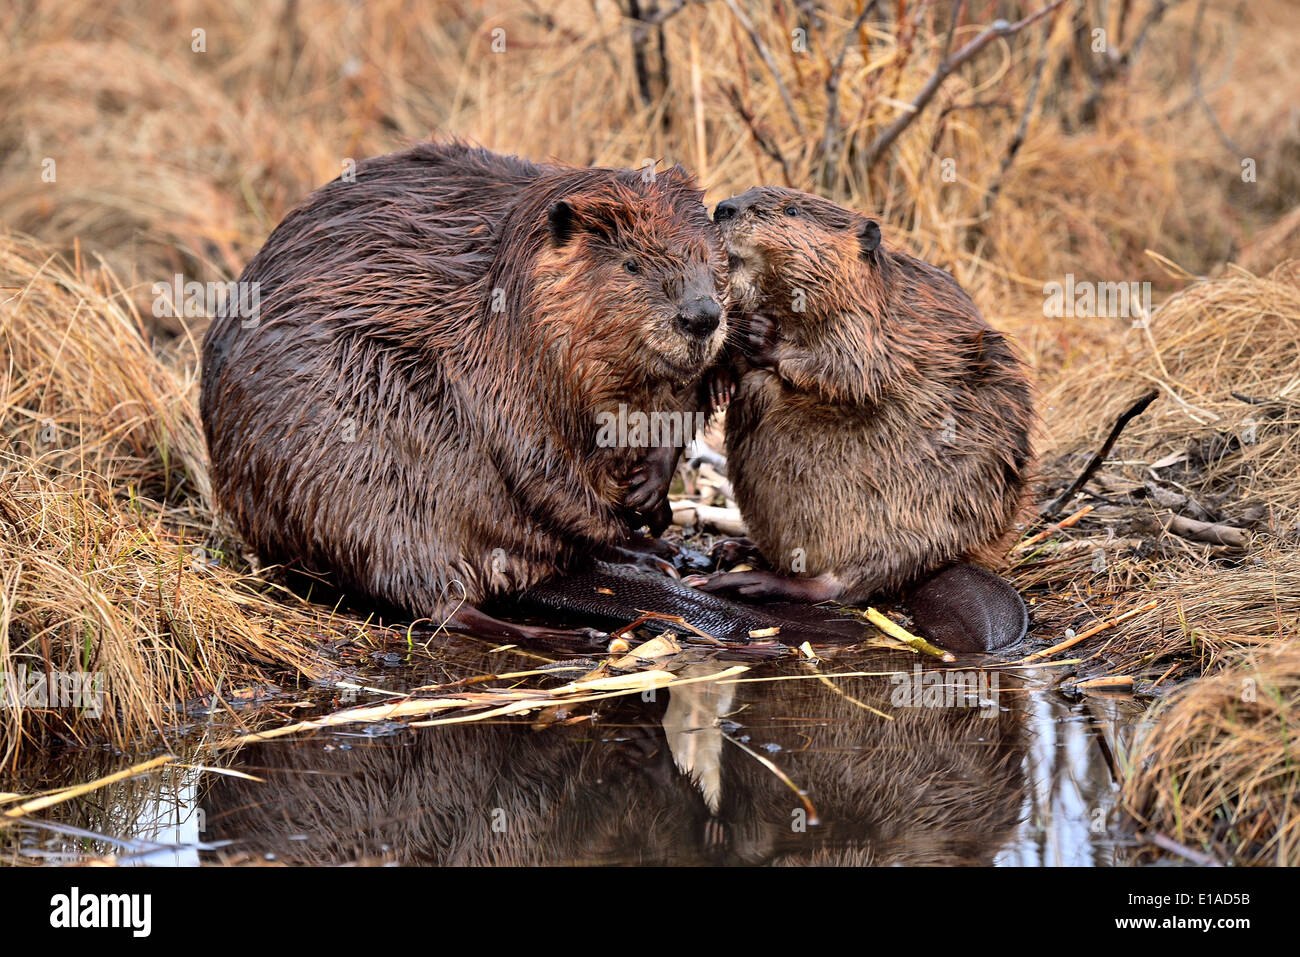 Two beavers sitting on the edge of their pond grooming and seeming to communicate to each other Stock Photo